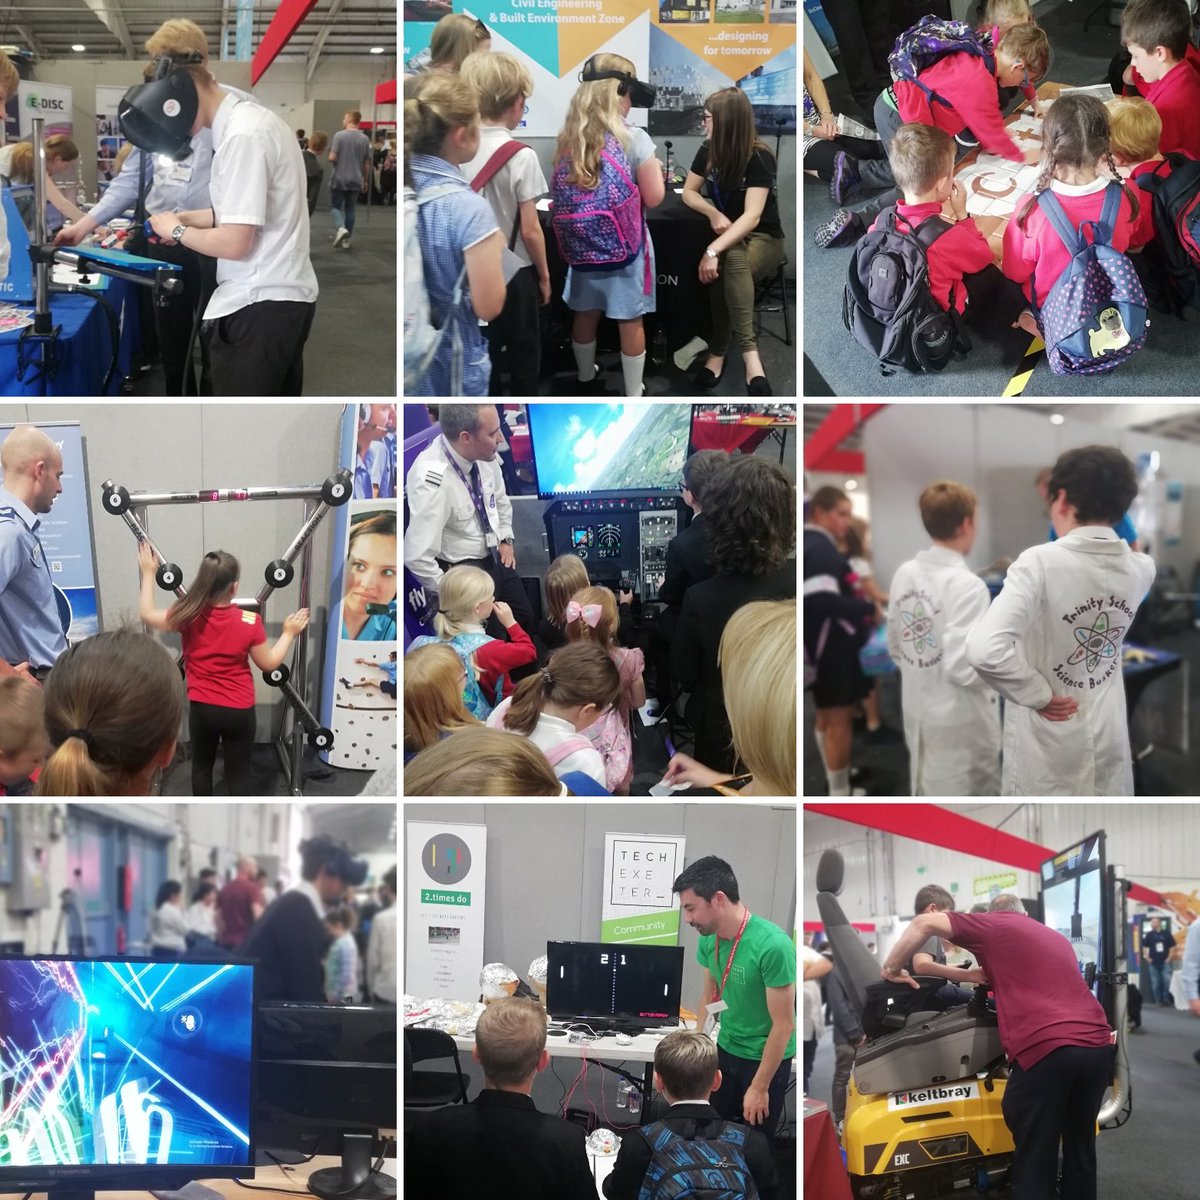 Awesome day at #BigBangSW today: engaging, inspiring and fun. #stemm #stemmcareers